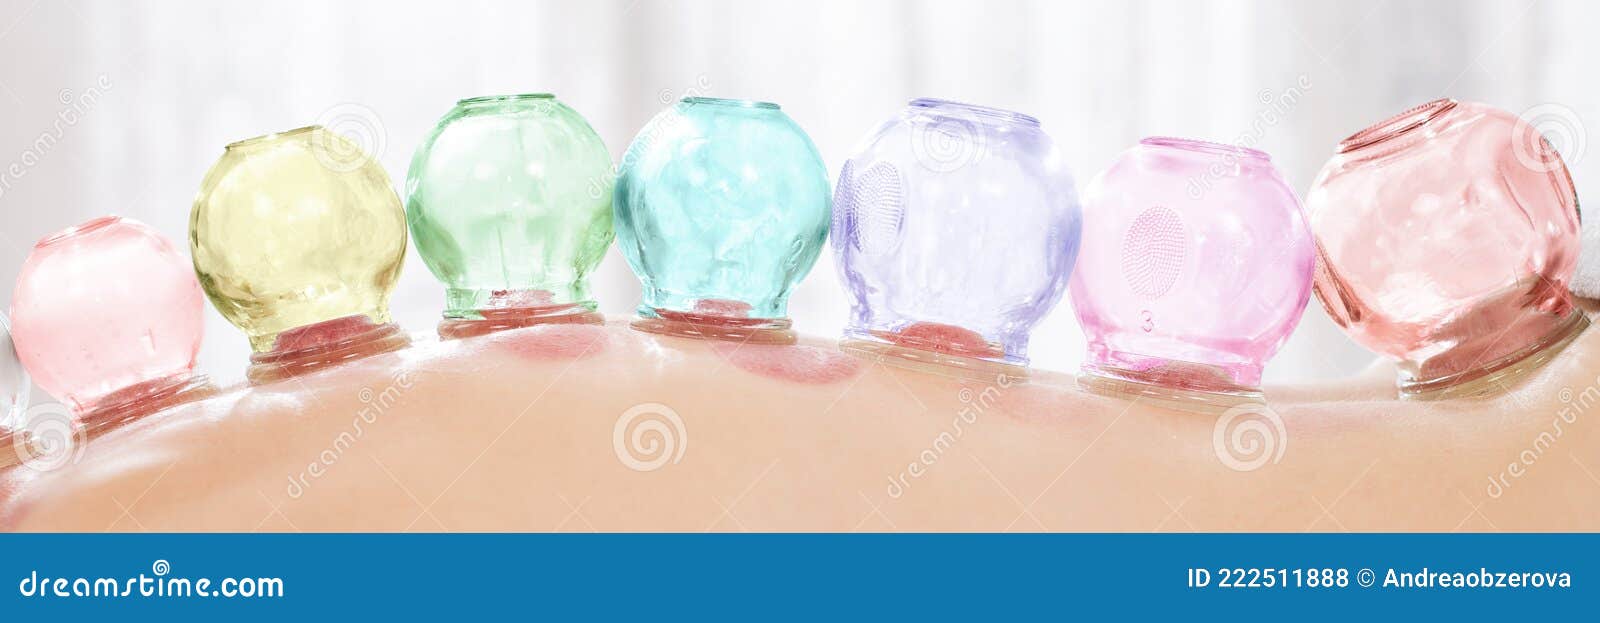 vacuum cupping therapy. close up detail of glass suction cups applied to patient`s back. web banner.